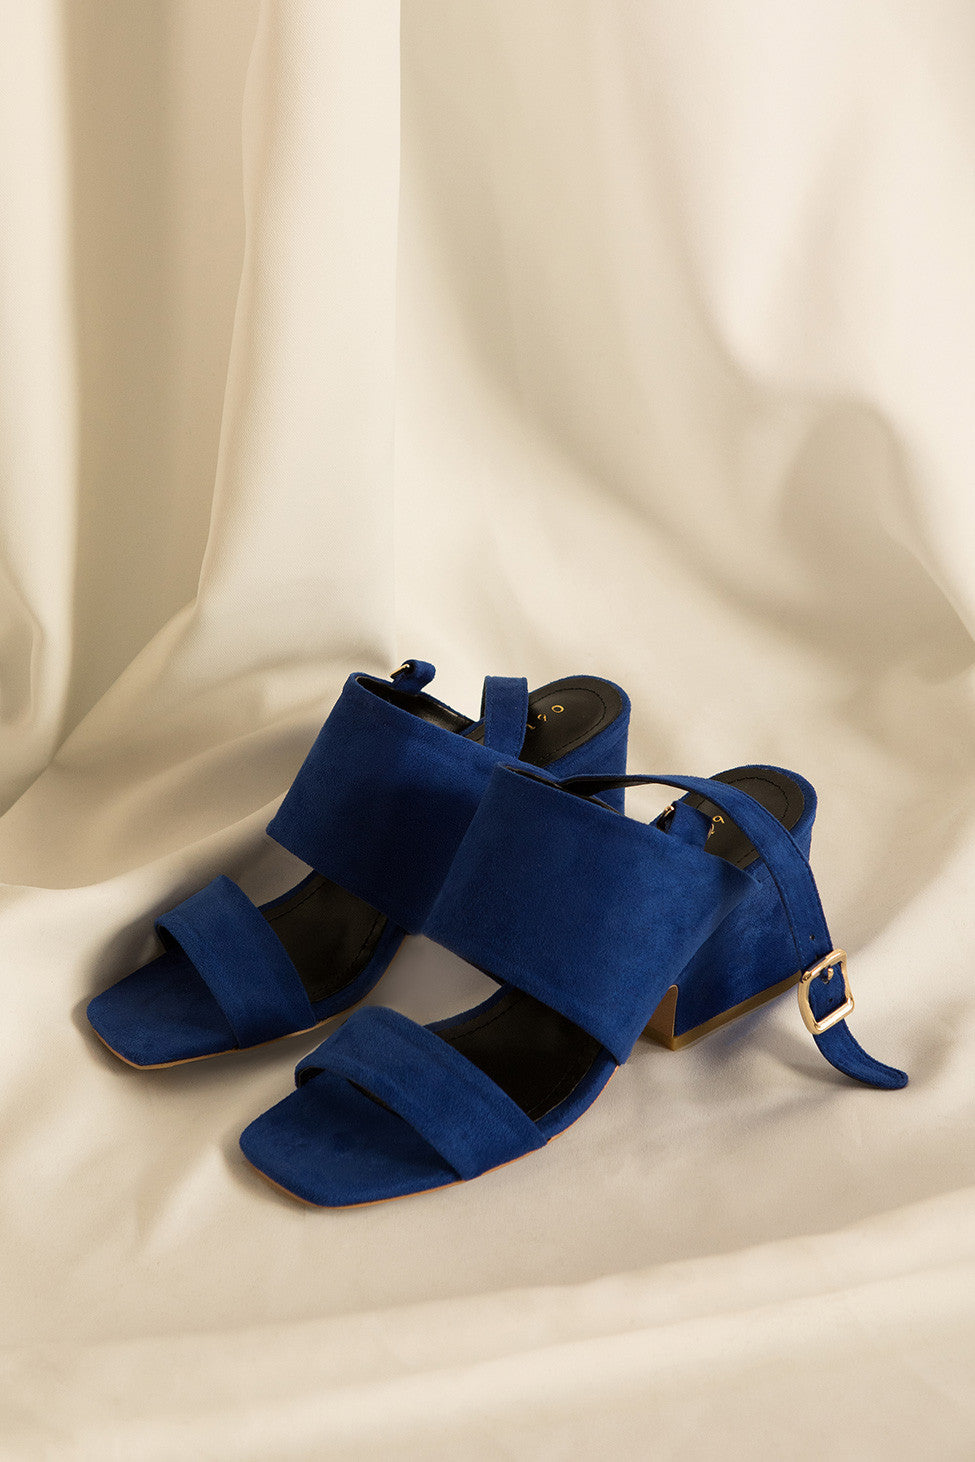 The Oleron featuring a straps across arch and around ankle with buckle, open toe. Covered block heel with rubber cap. Lightly padded footbed. 